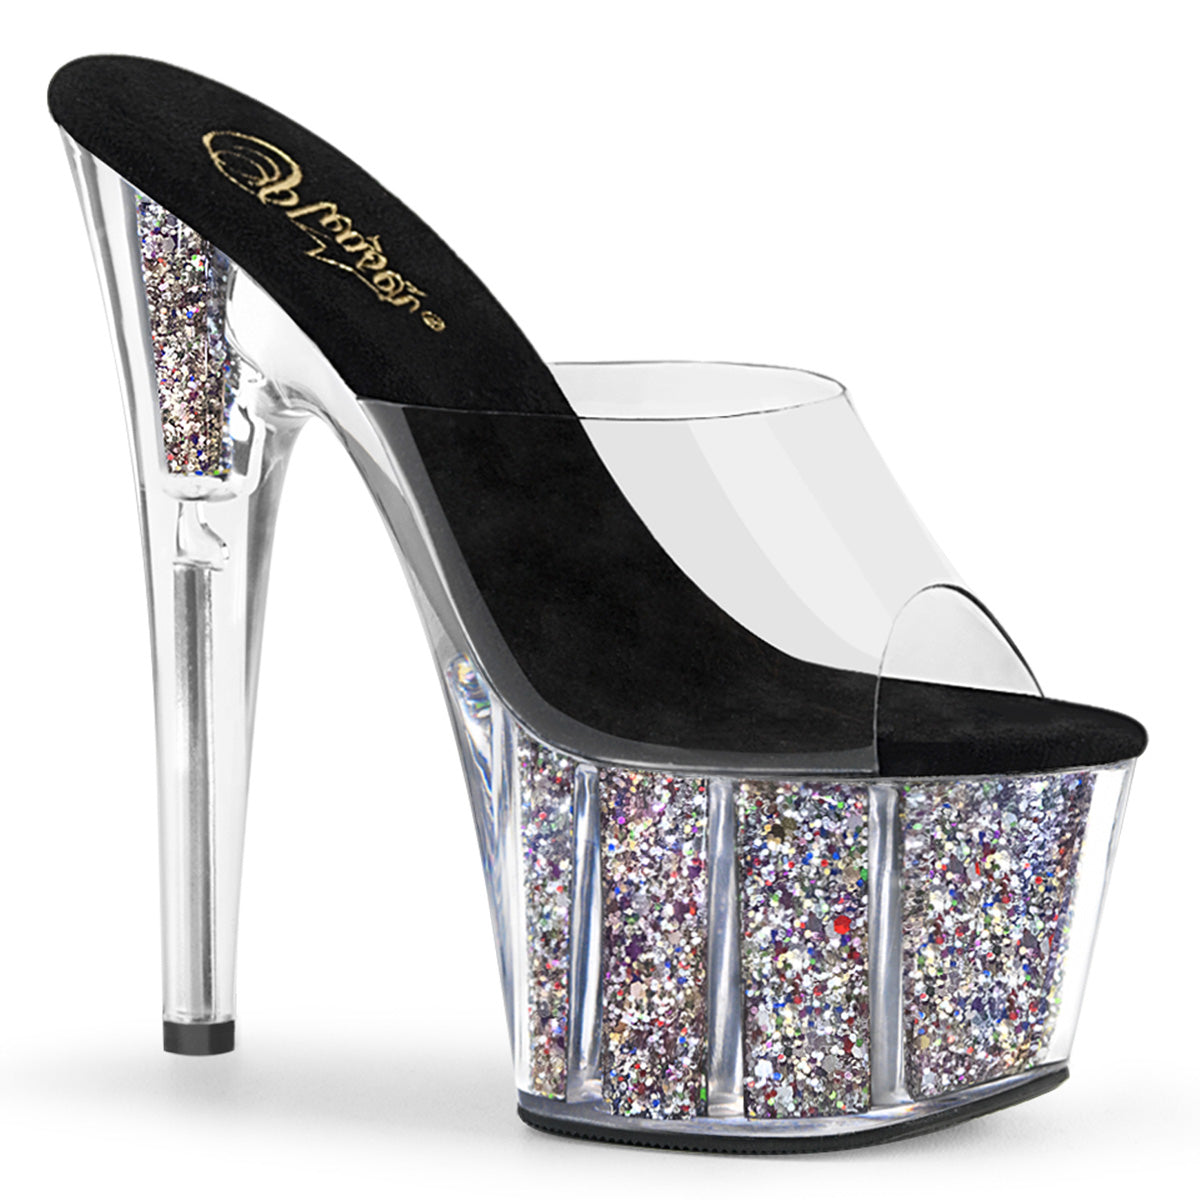 ADORE-701CG Pleaser Sexy 7 Inch Heel Glitter Platform Shoes-Pleaser- Sexy Shoes